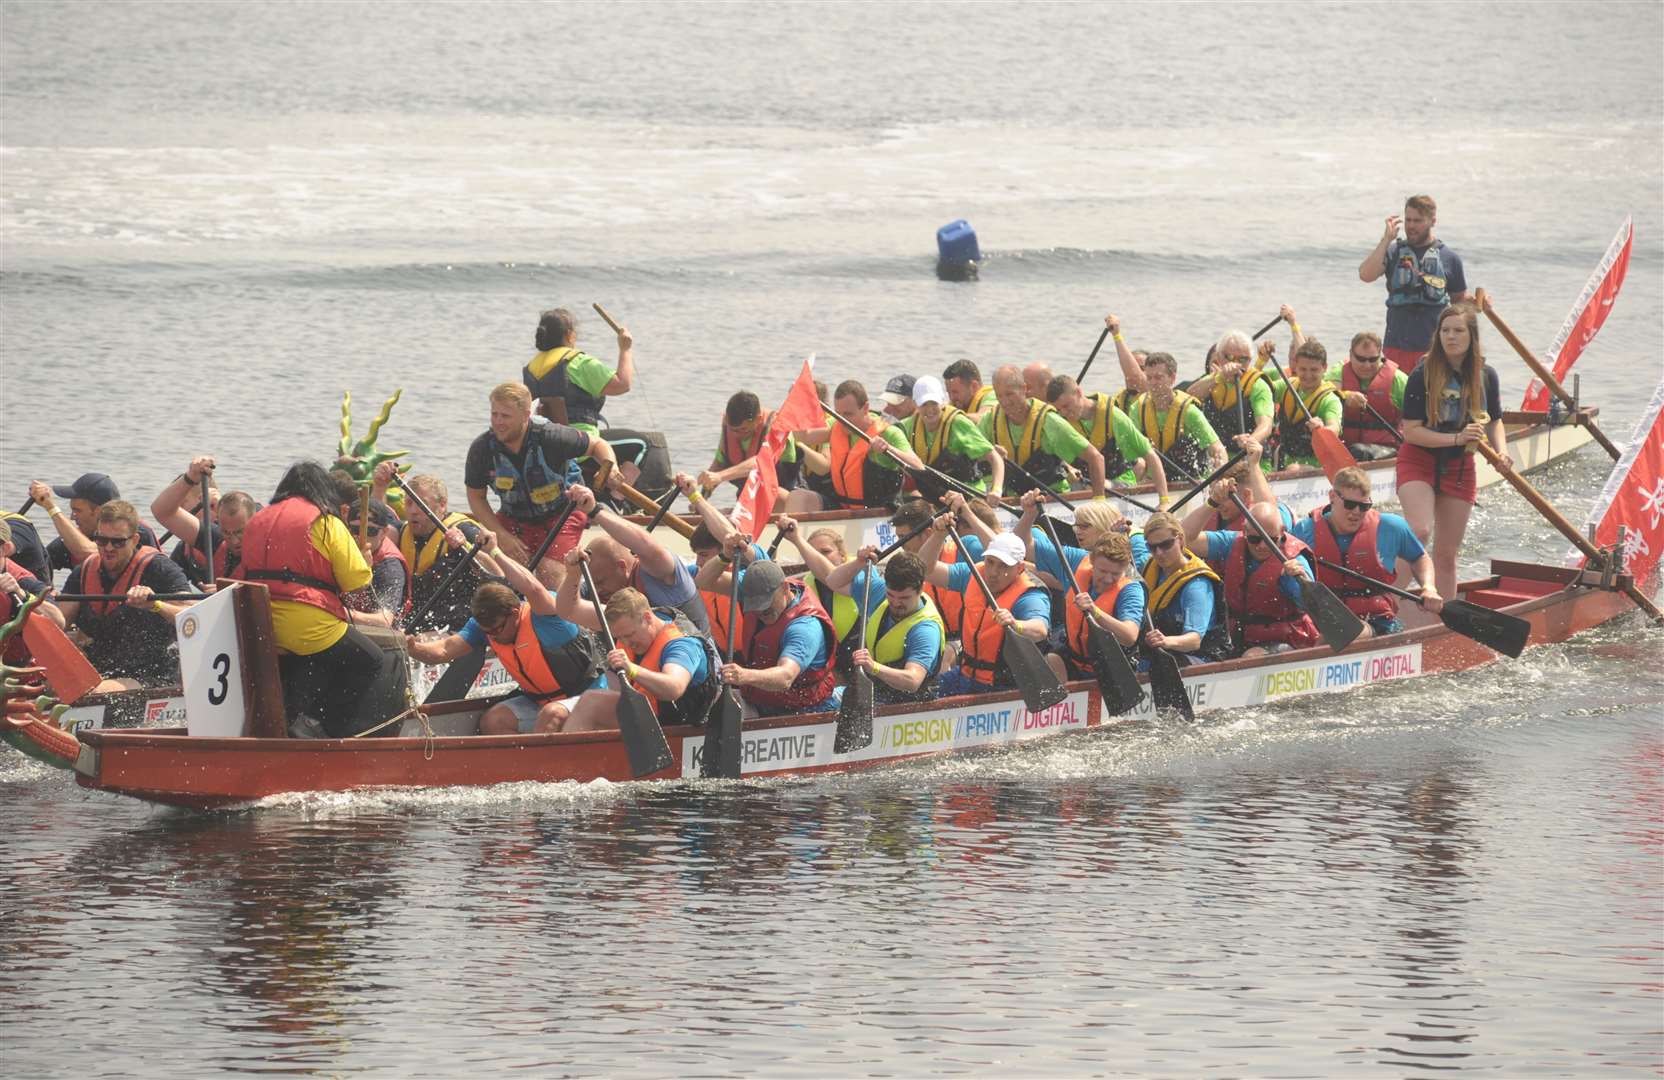 Dragon boat racing will be part of the festival Picture: Steve Crispe